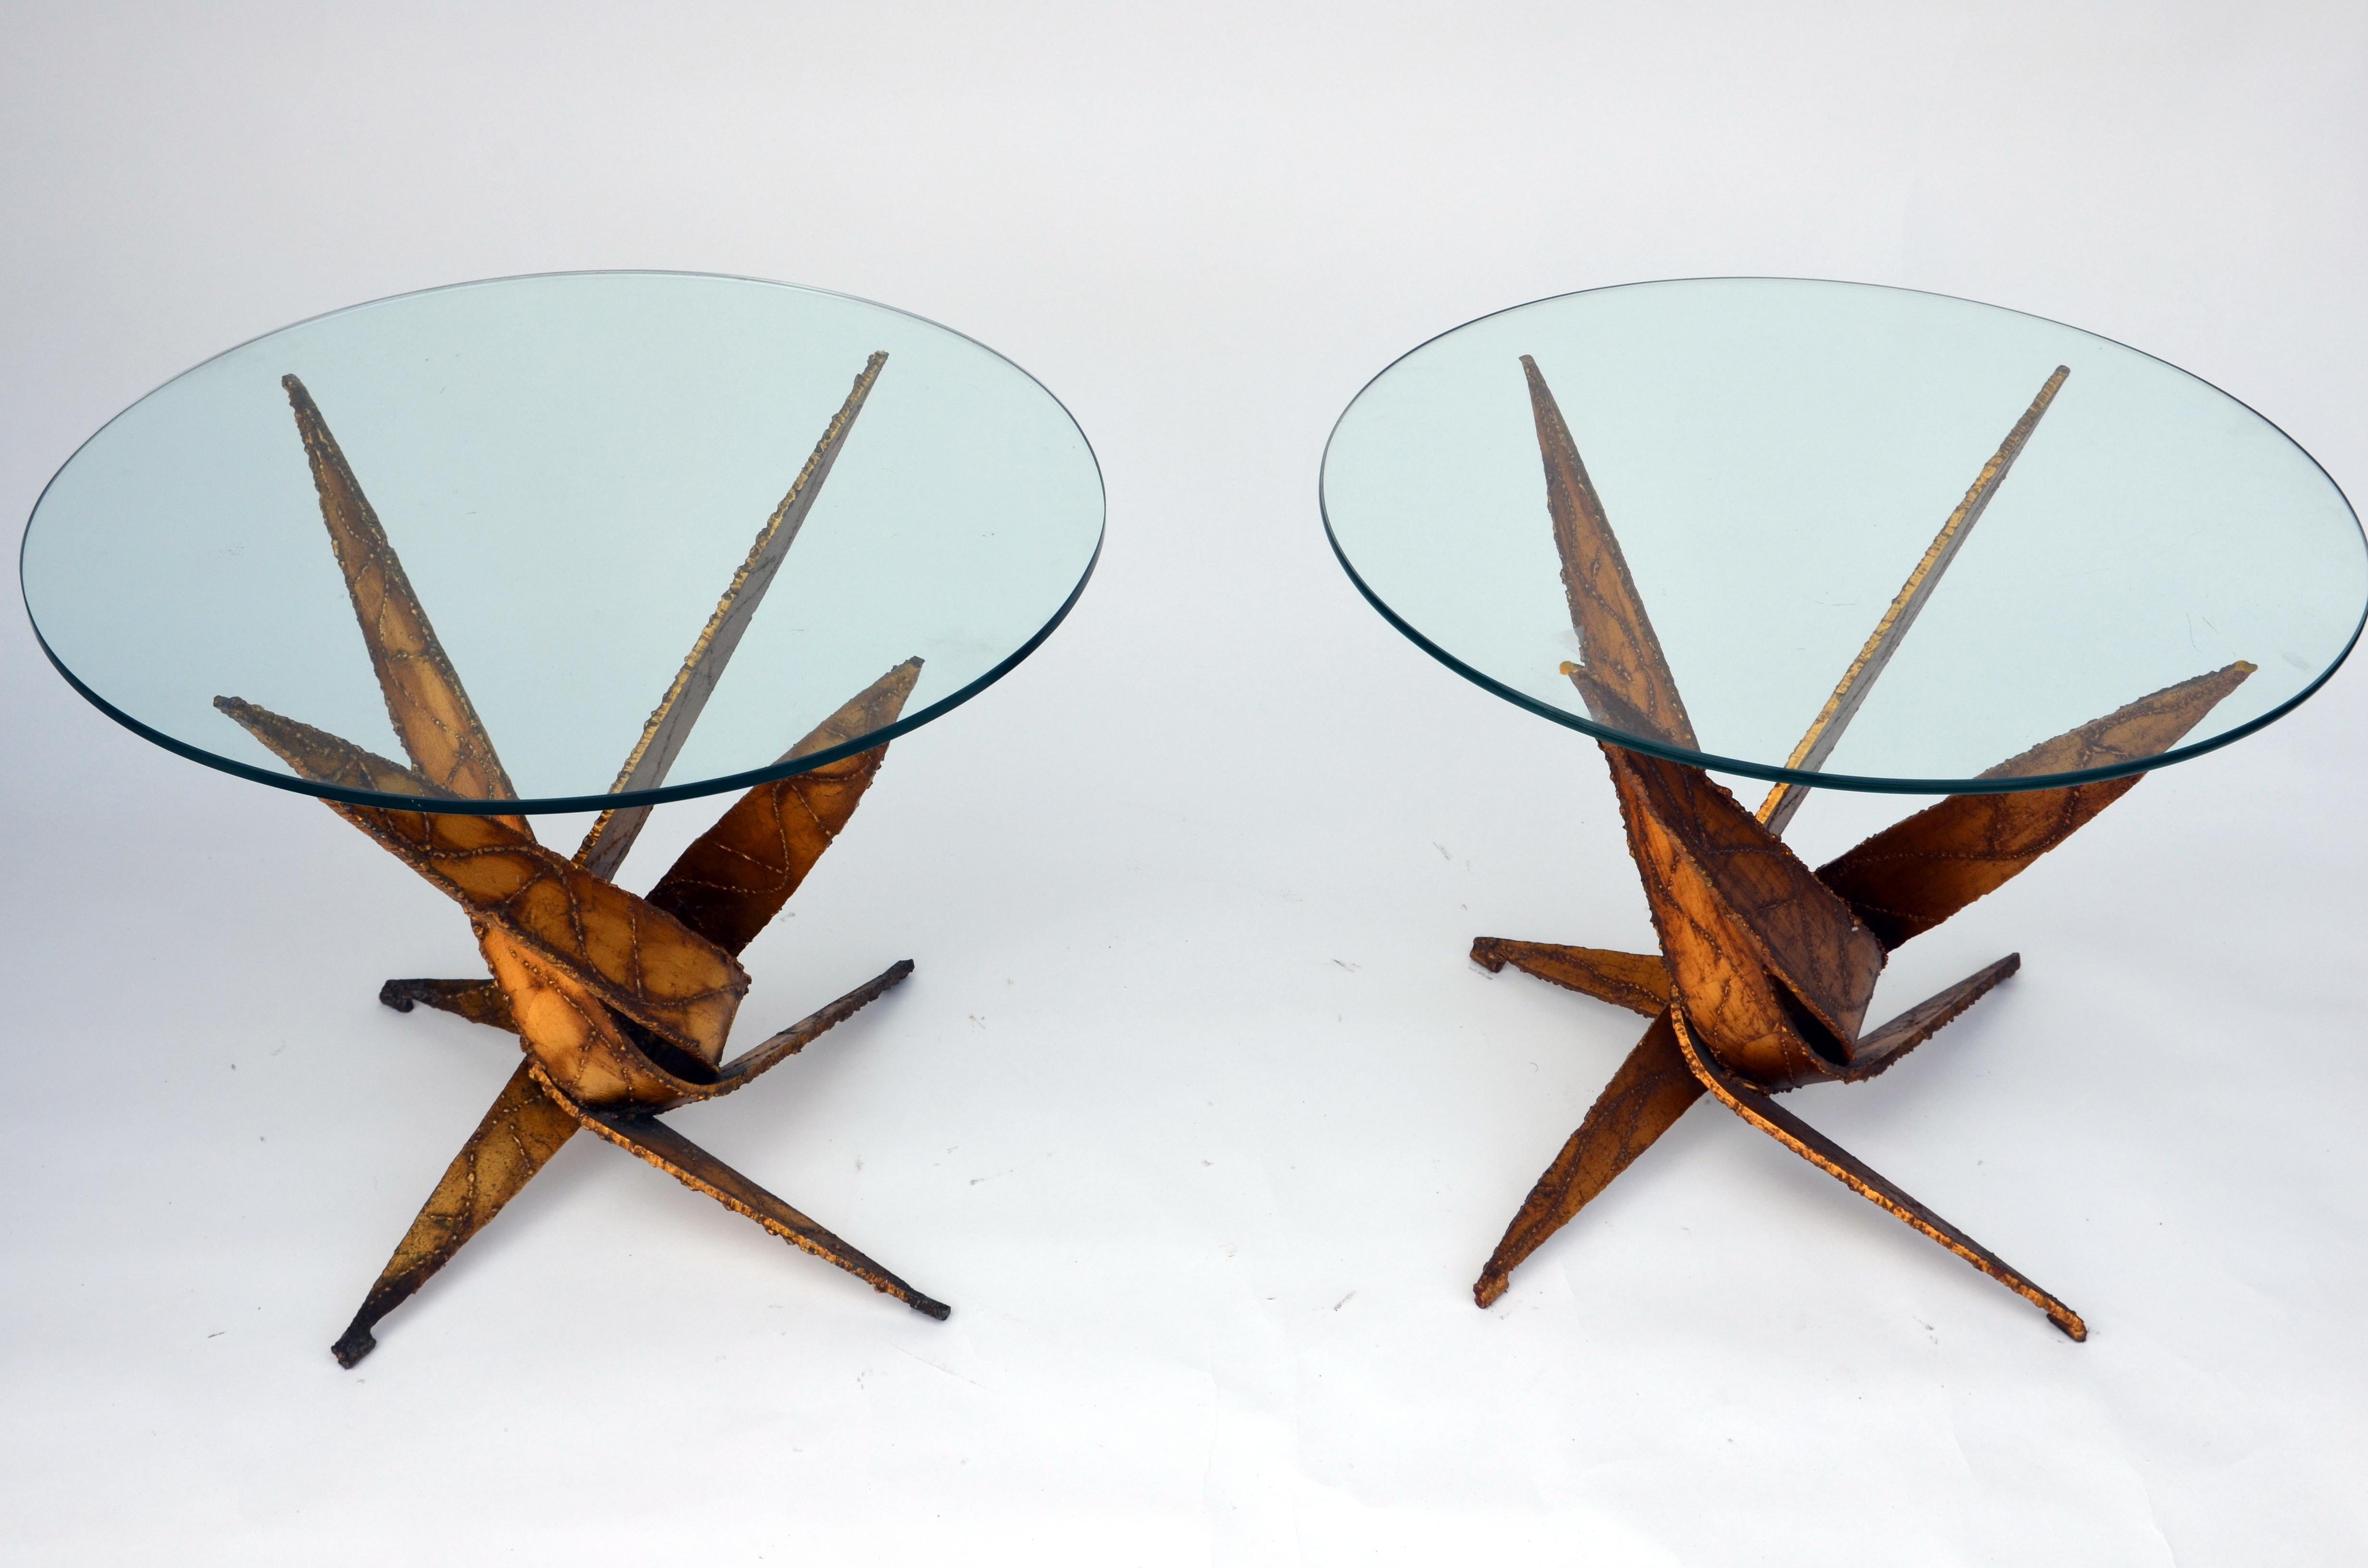 Organic Modern Exceptional Pair of Brutalist Side Tables by Silas Seandel